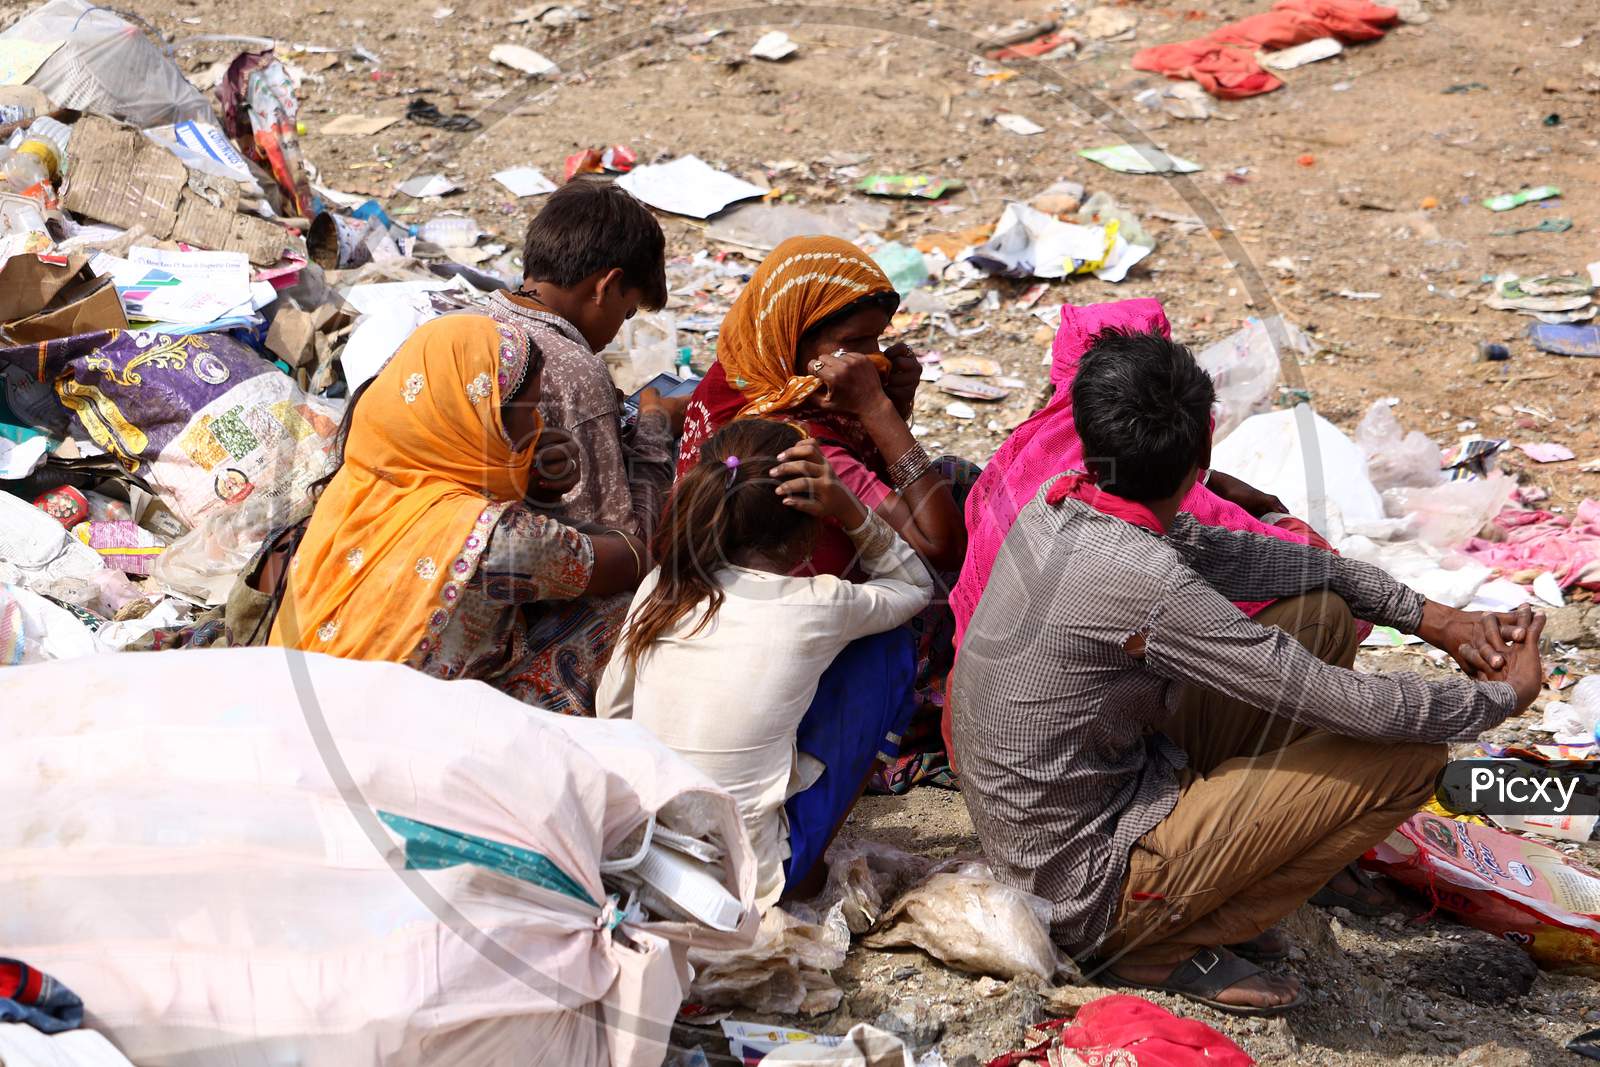 Indian Rag-Pickers Look For Recyclable Material At A Municipal Waste Dumping Site On The Eve Of World Environment Day In Ajmer, Rajasthan, India On 04 May 2020.